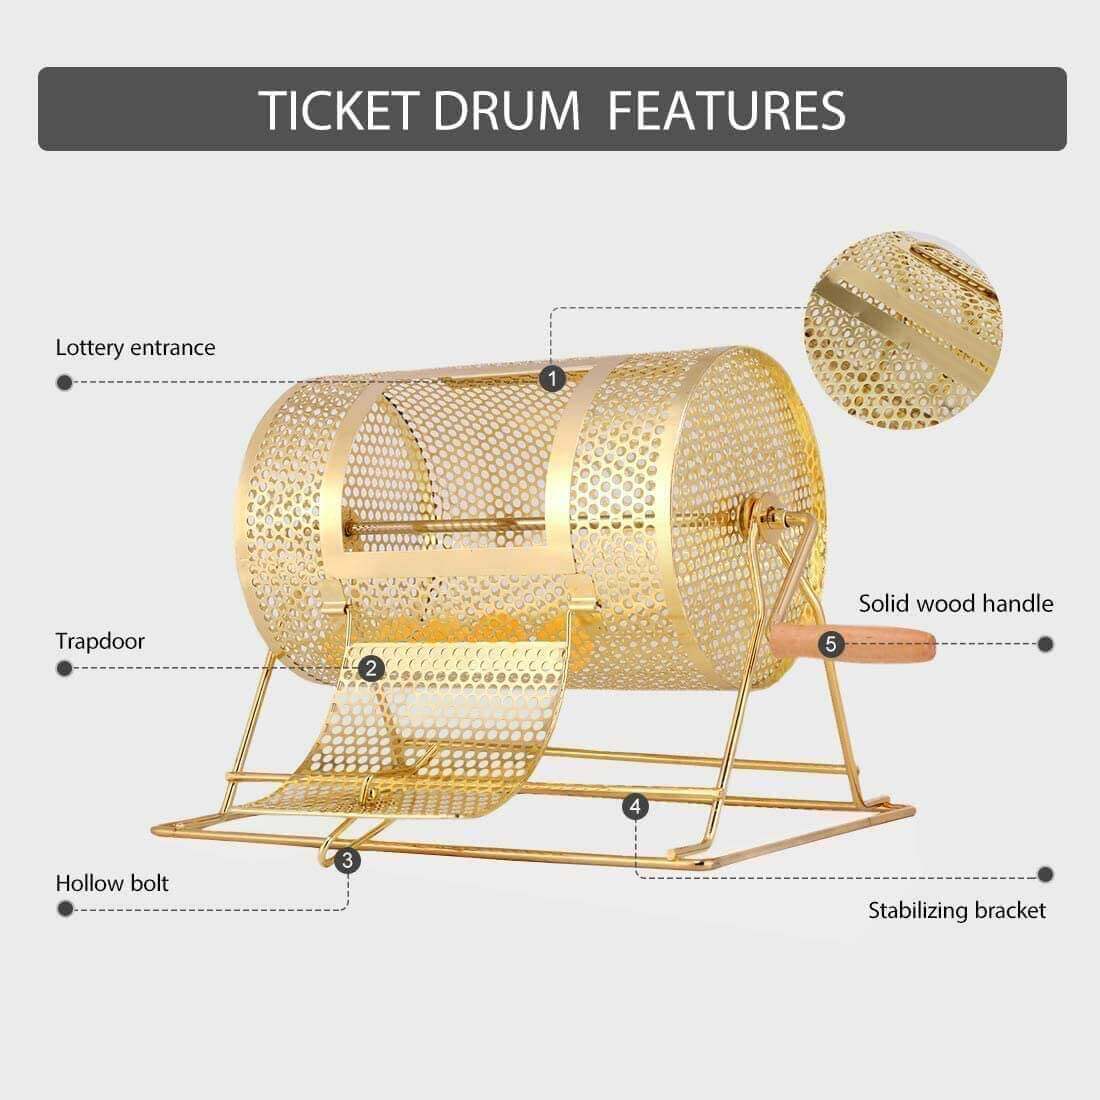 VIVOHOME 16 Inch x 12 Inch Brass Plated Raffle Drum Lottery Spinning Drawing with Wooden Turning Handle Holds 5000 Tickets